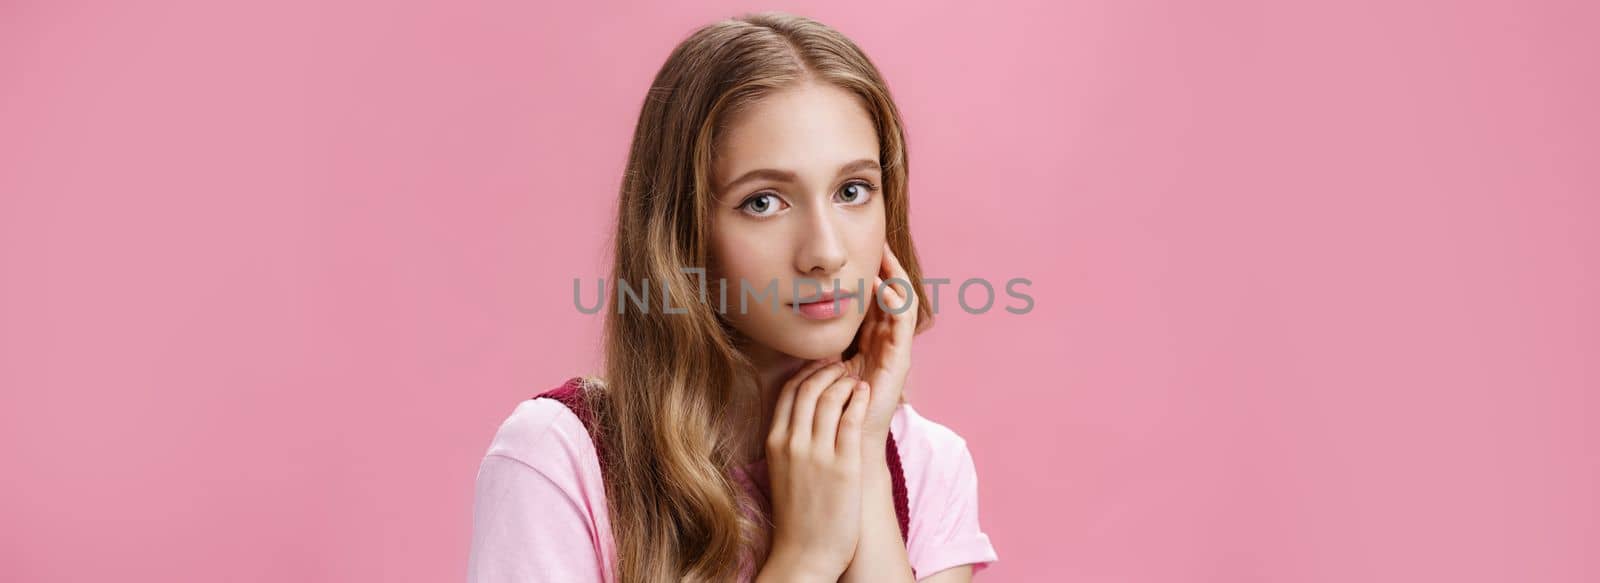 Woan feeling beautiful the way she is. Charming feminine and tender young girl with fair wavy natural hair and slight make-up touching face gently taking care of skin with organic cosmetics.